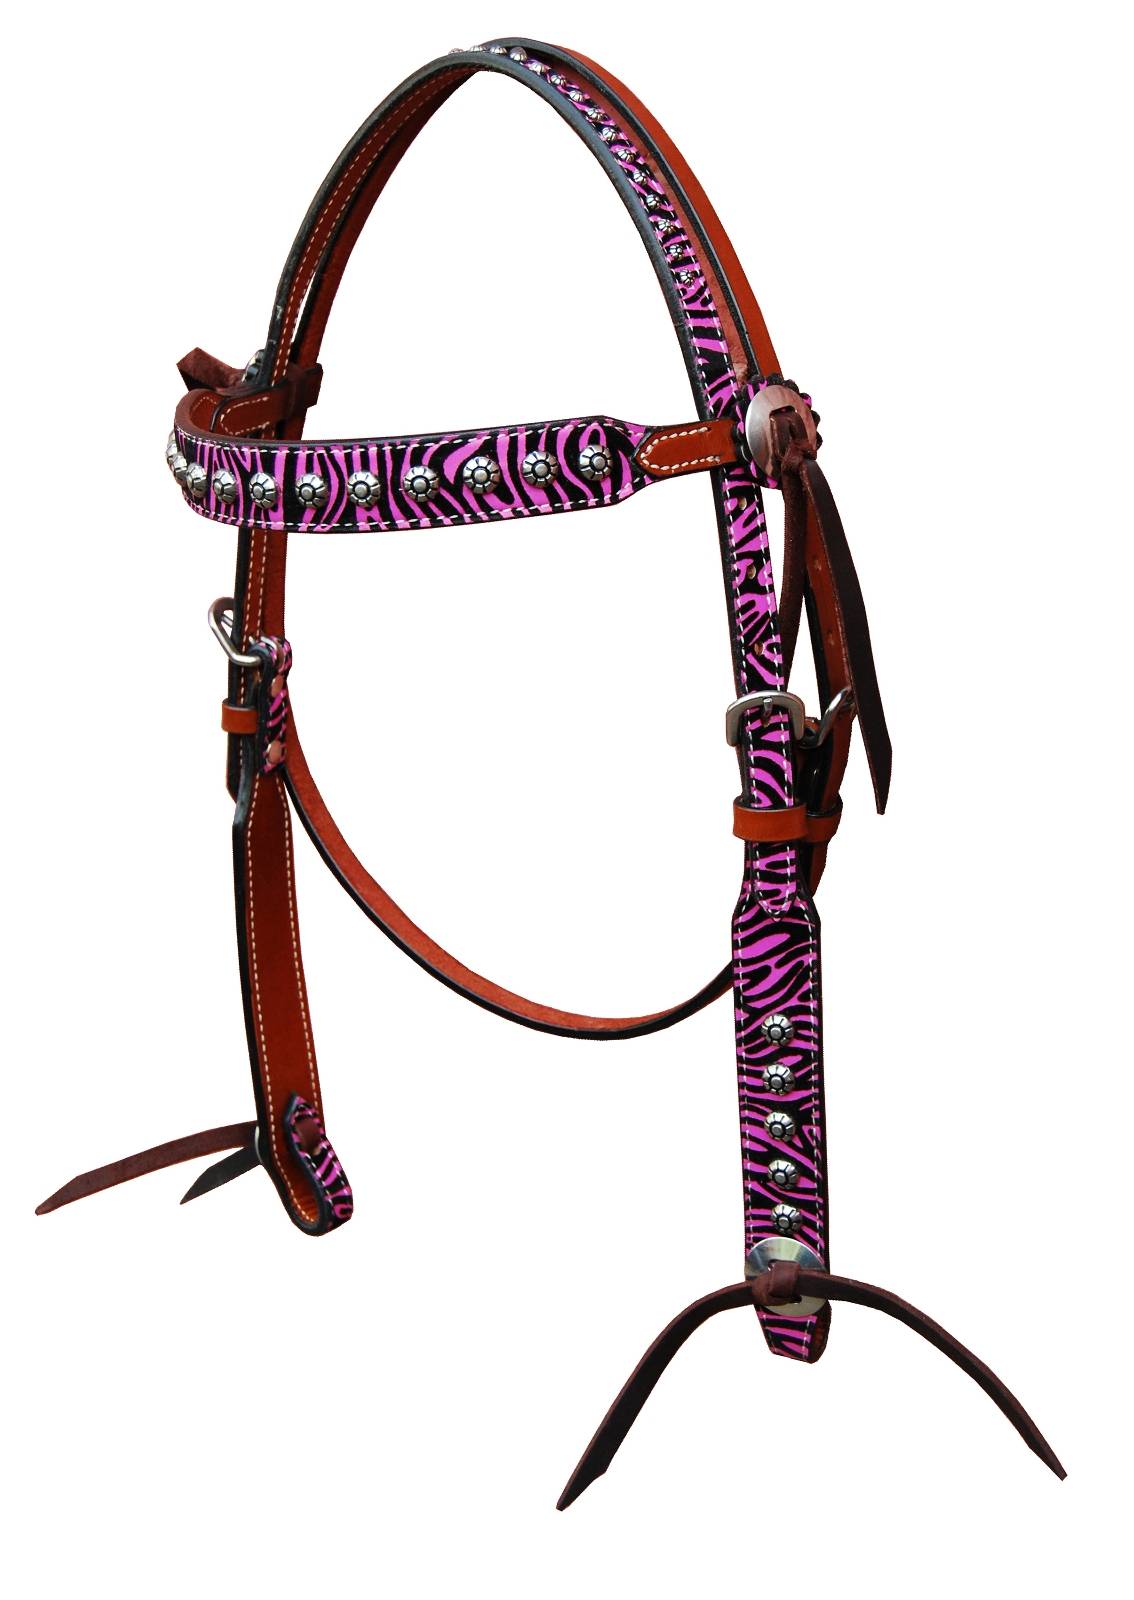 468856PINK HRSE Turn-Two Browband Headstall - Chasing Wild sku 468856PINK HRSE